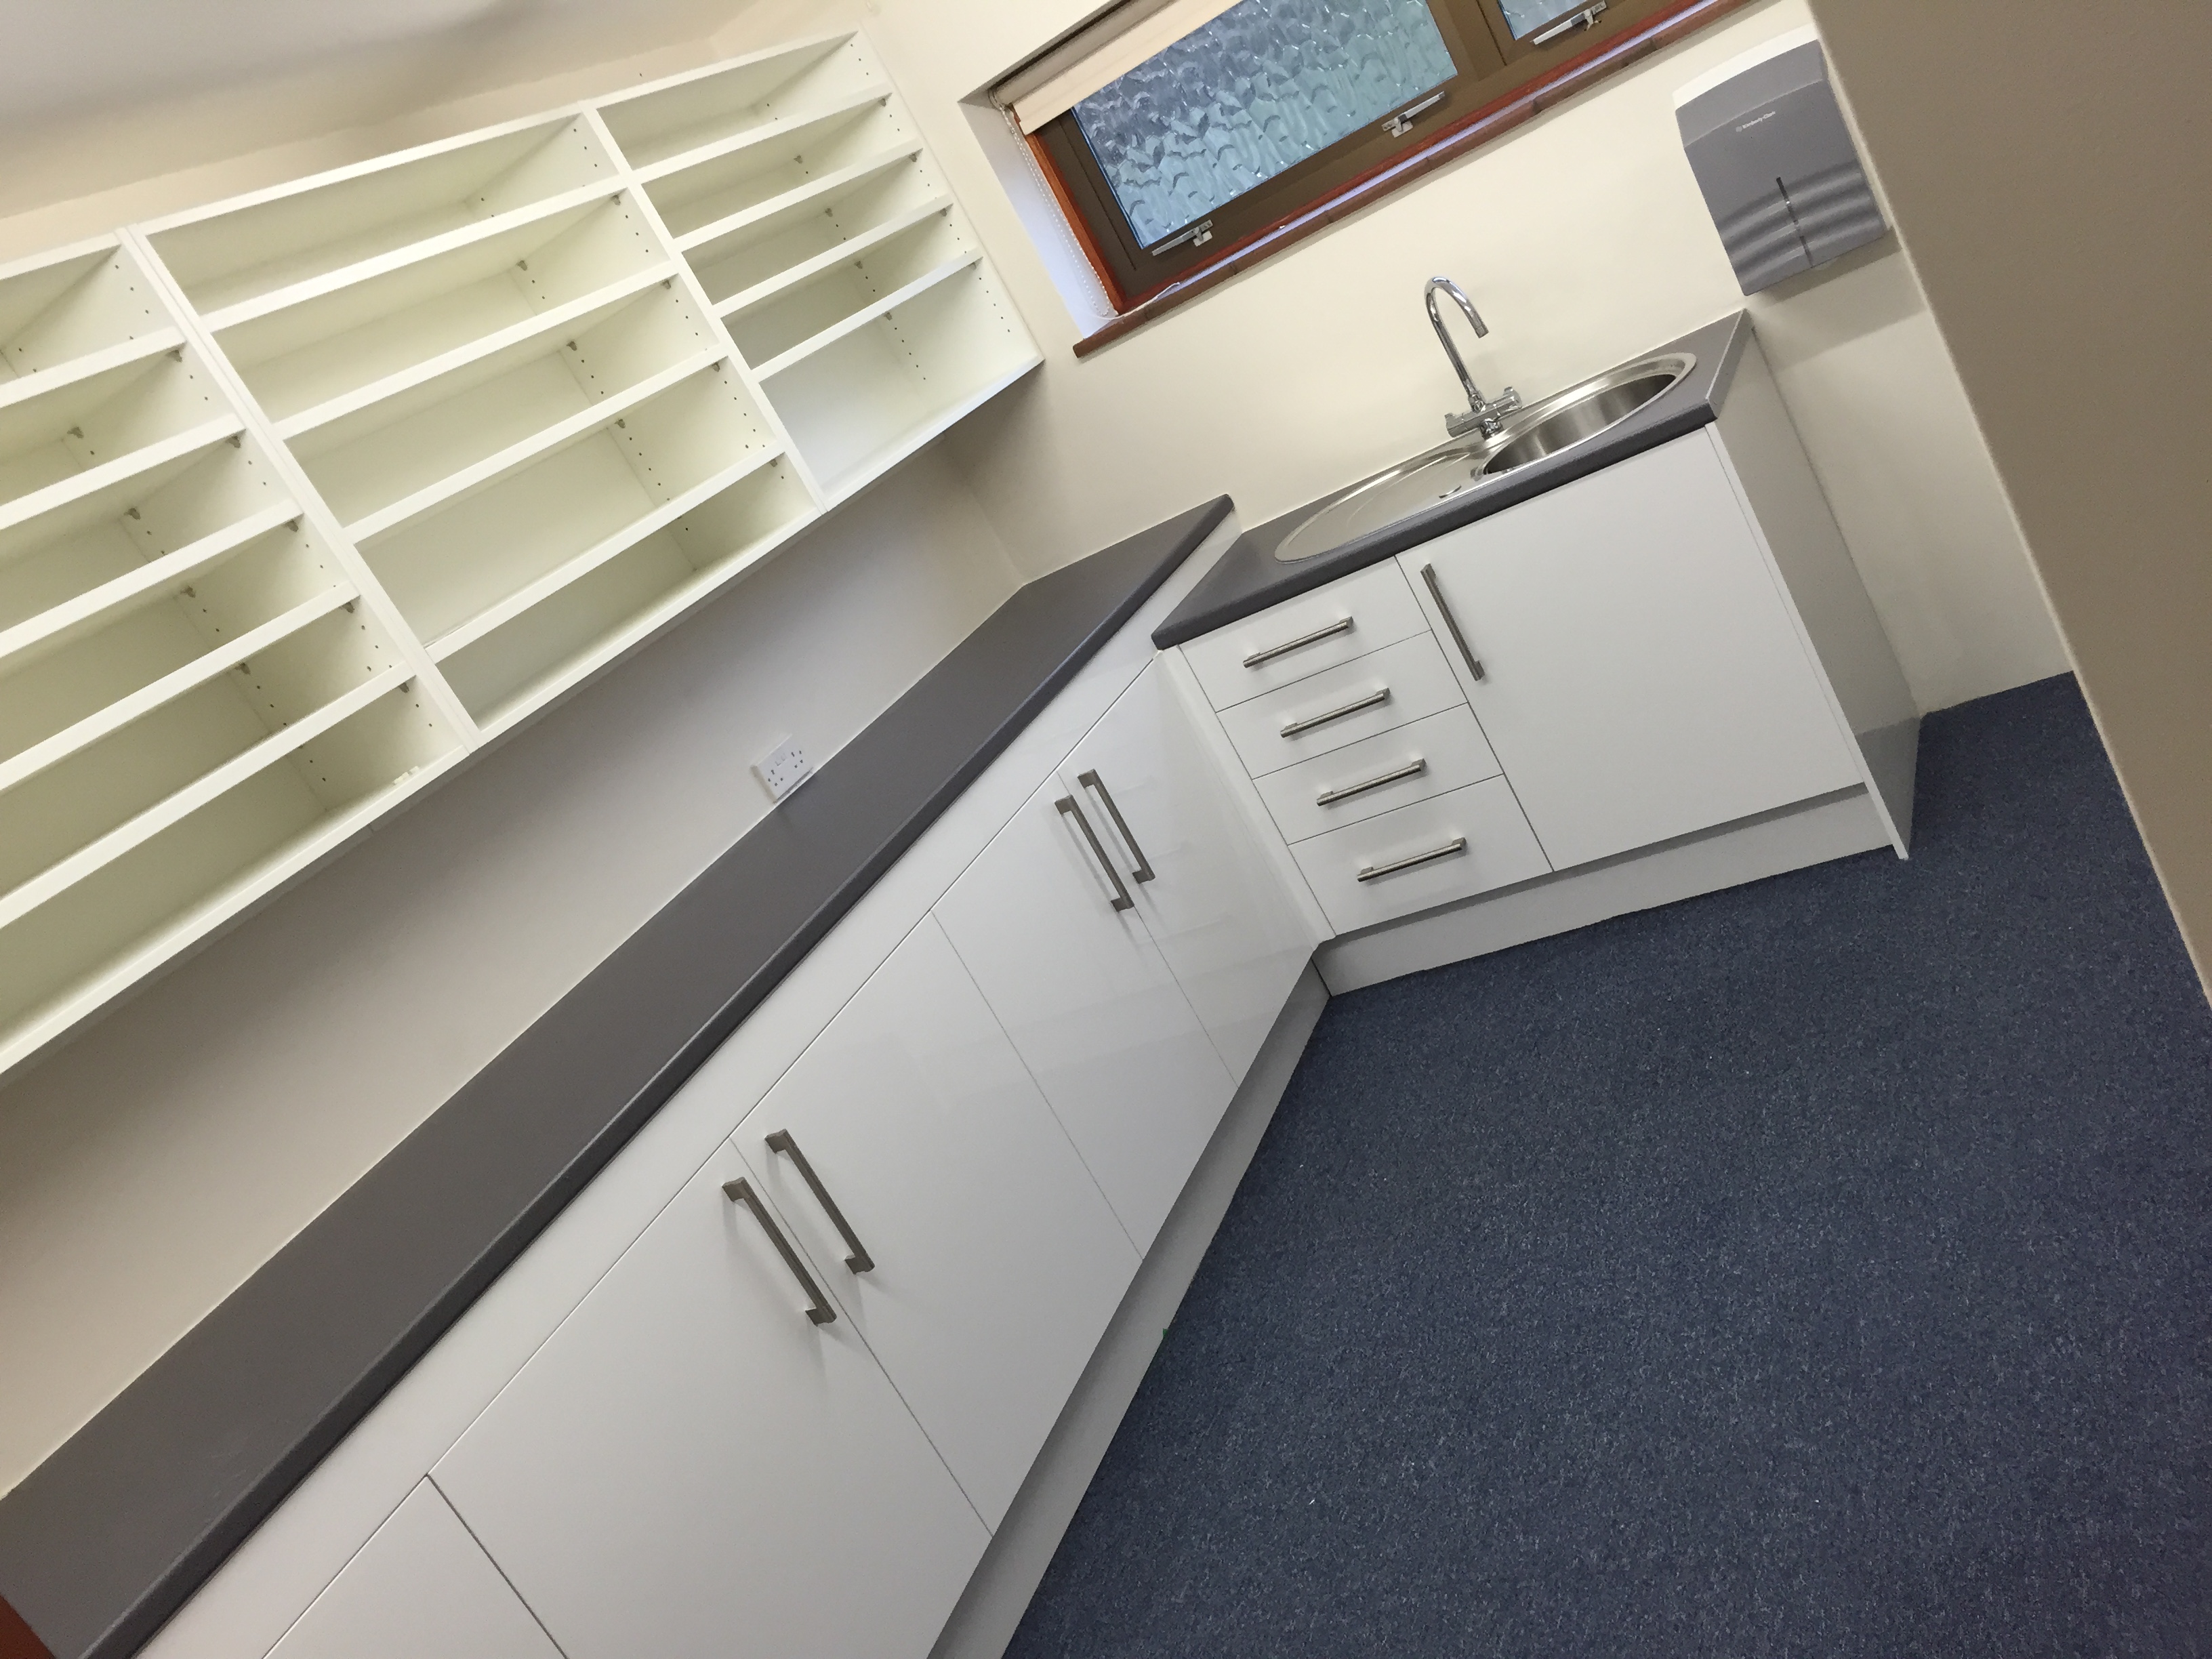 NHS GP Surgery – Dispensary Design & Fit out